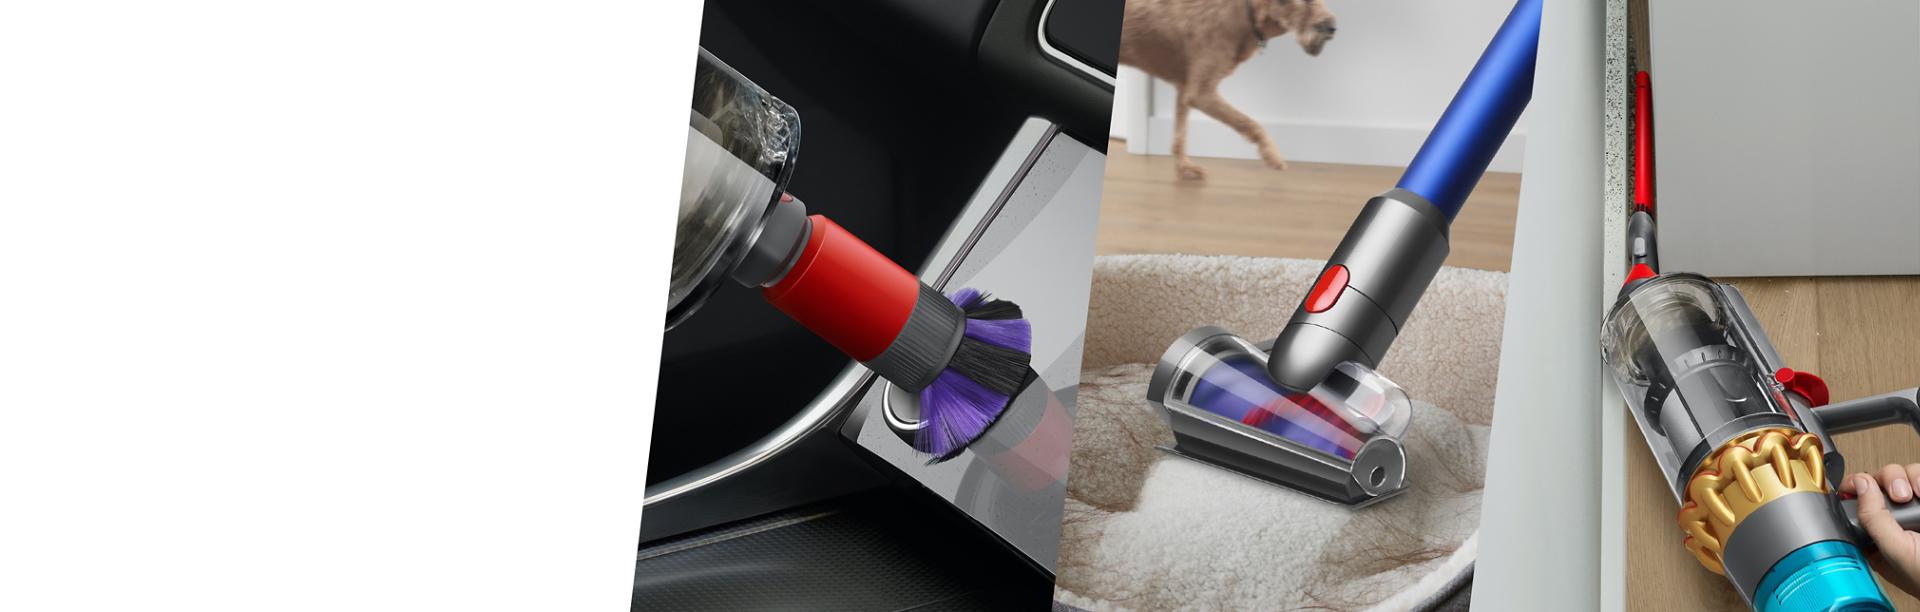 Dyson vacuum accessories cleaning a sofa